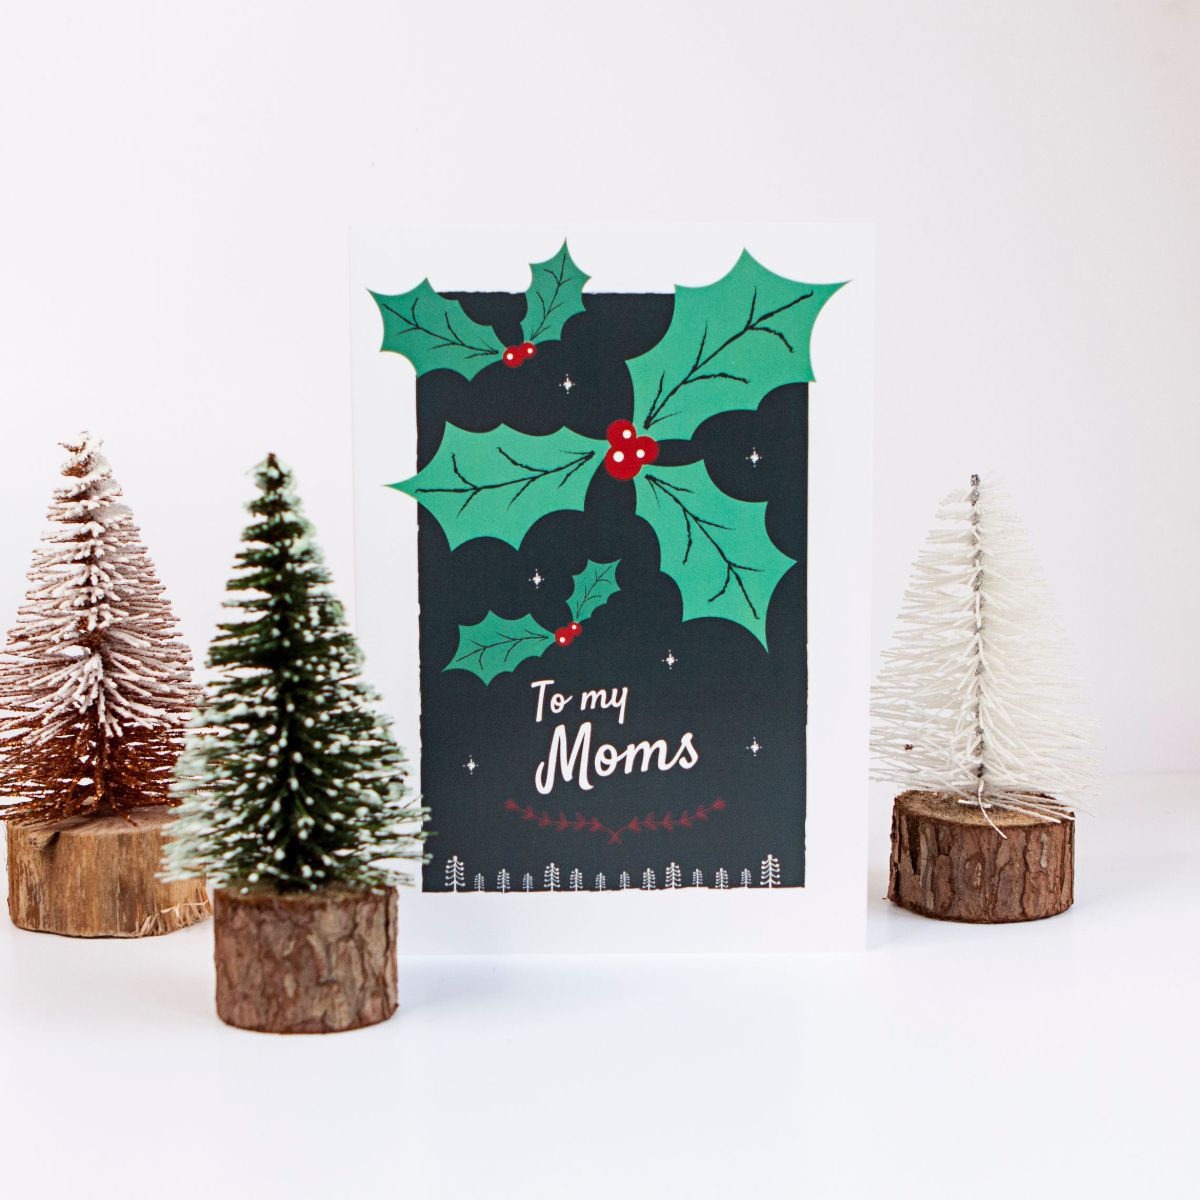 Holly Christmas Card for Two Lesbian Moms